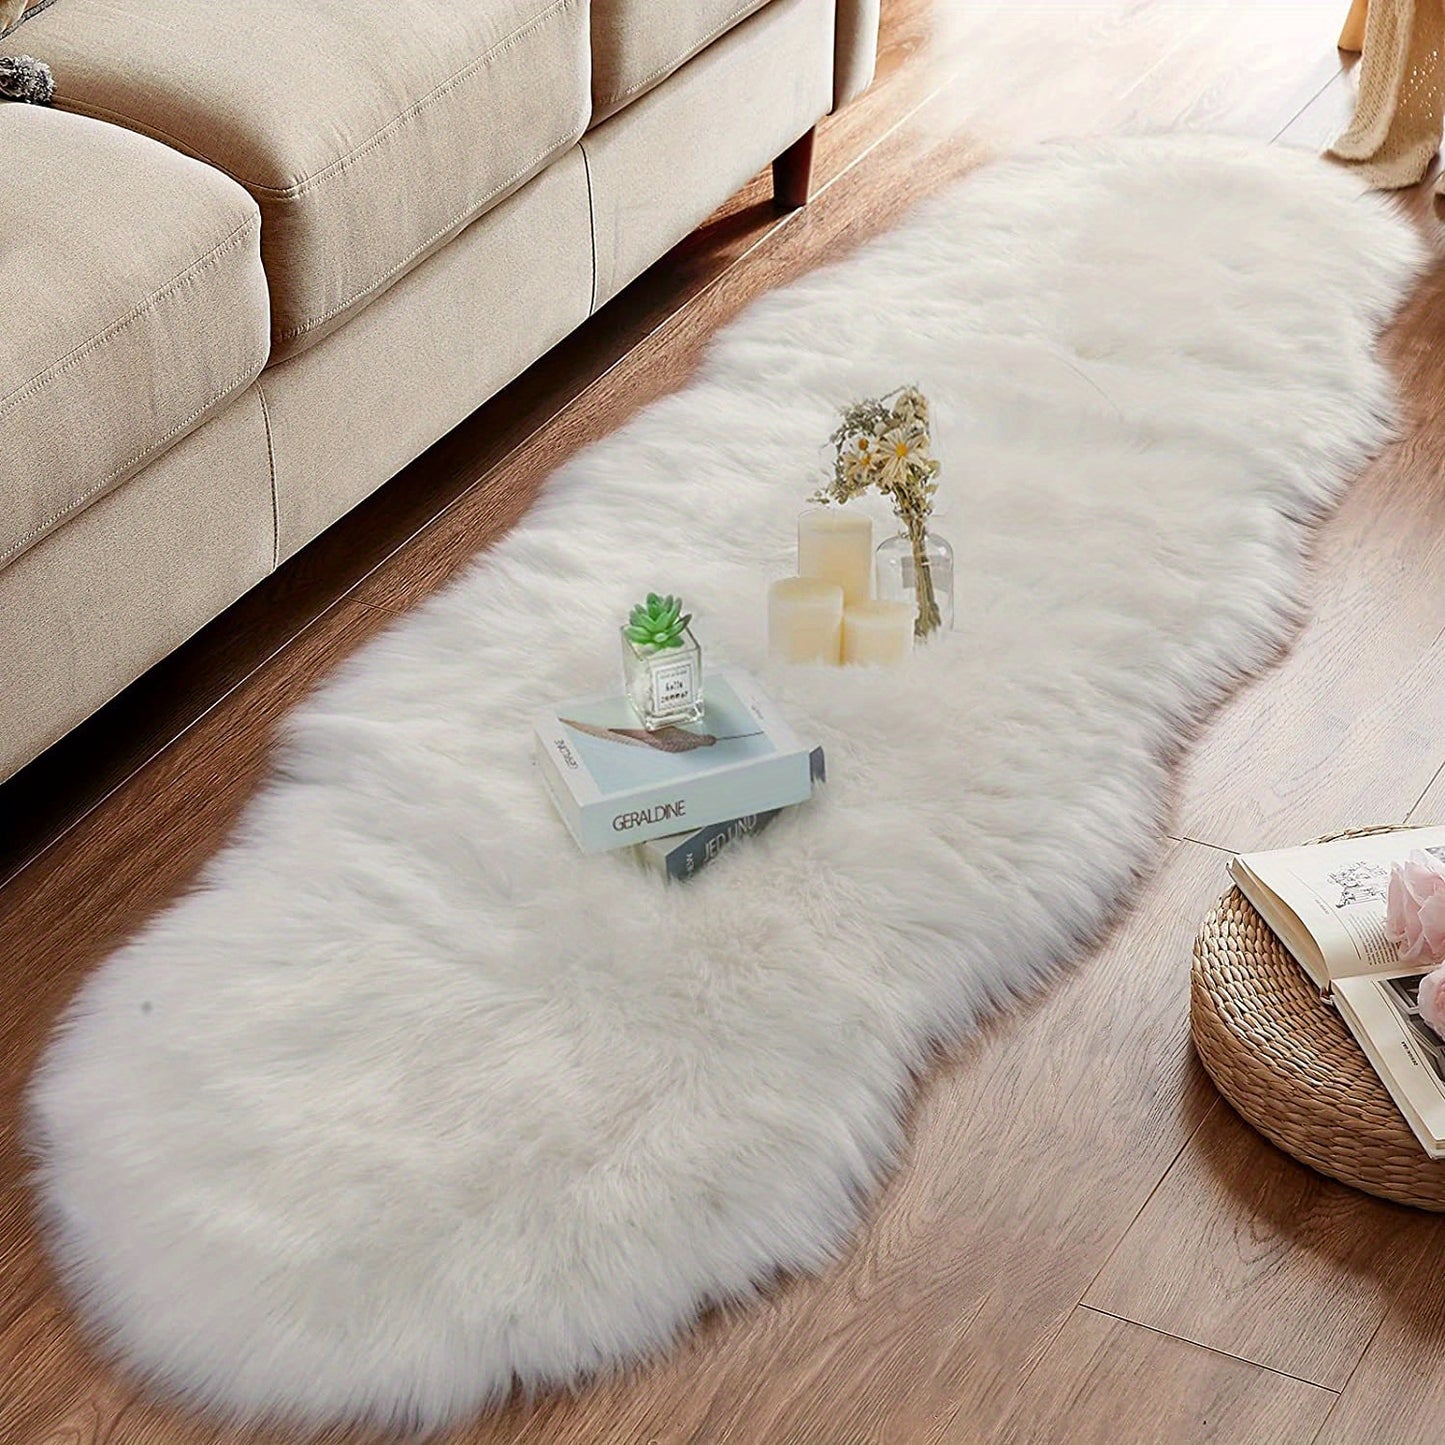 1pc Faux Fur Shag Area Rugs, Shaggy Area Rugs Ultra Soft Sheepskin Fur Rug, White Fuzzy Rug Machine Washable Shag Rug For Living Room Bedroom Bedside, Throw Rugs For Home Deocr, Room Decor